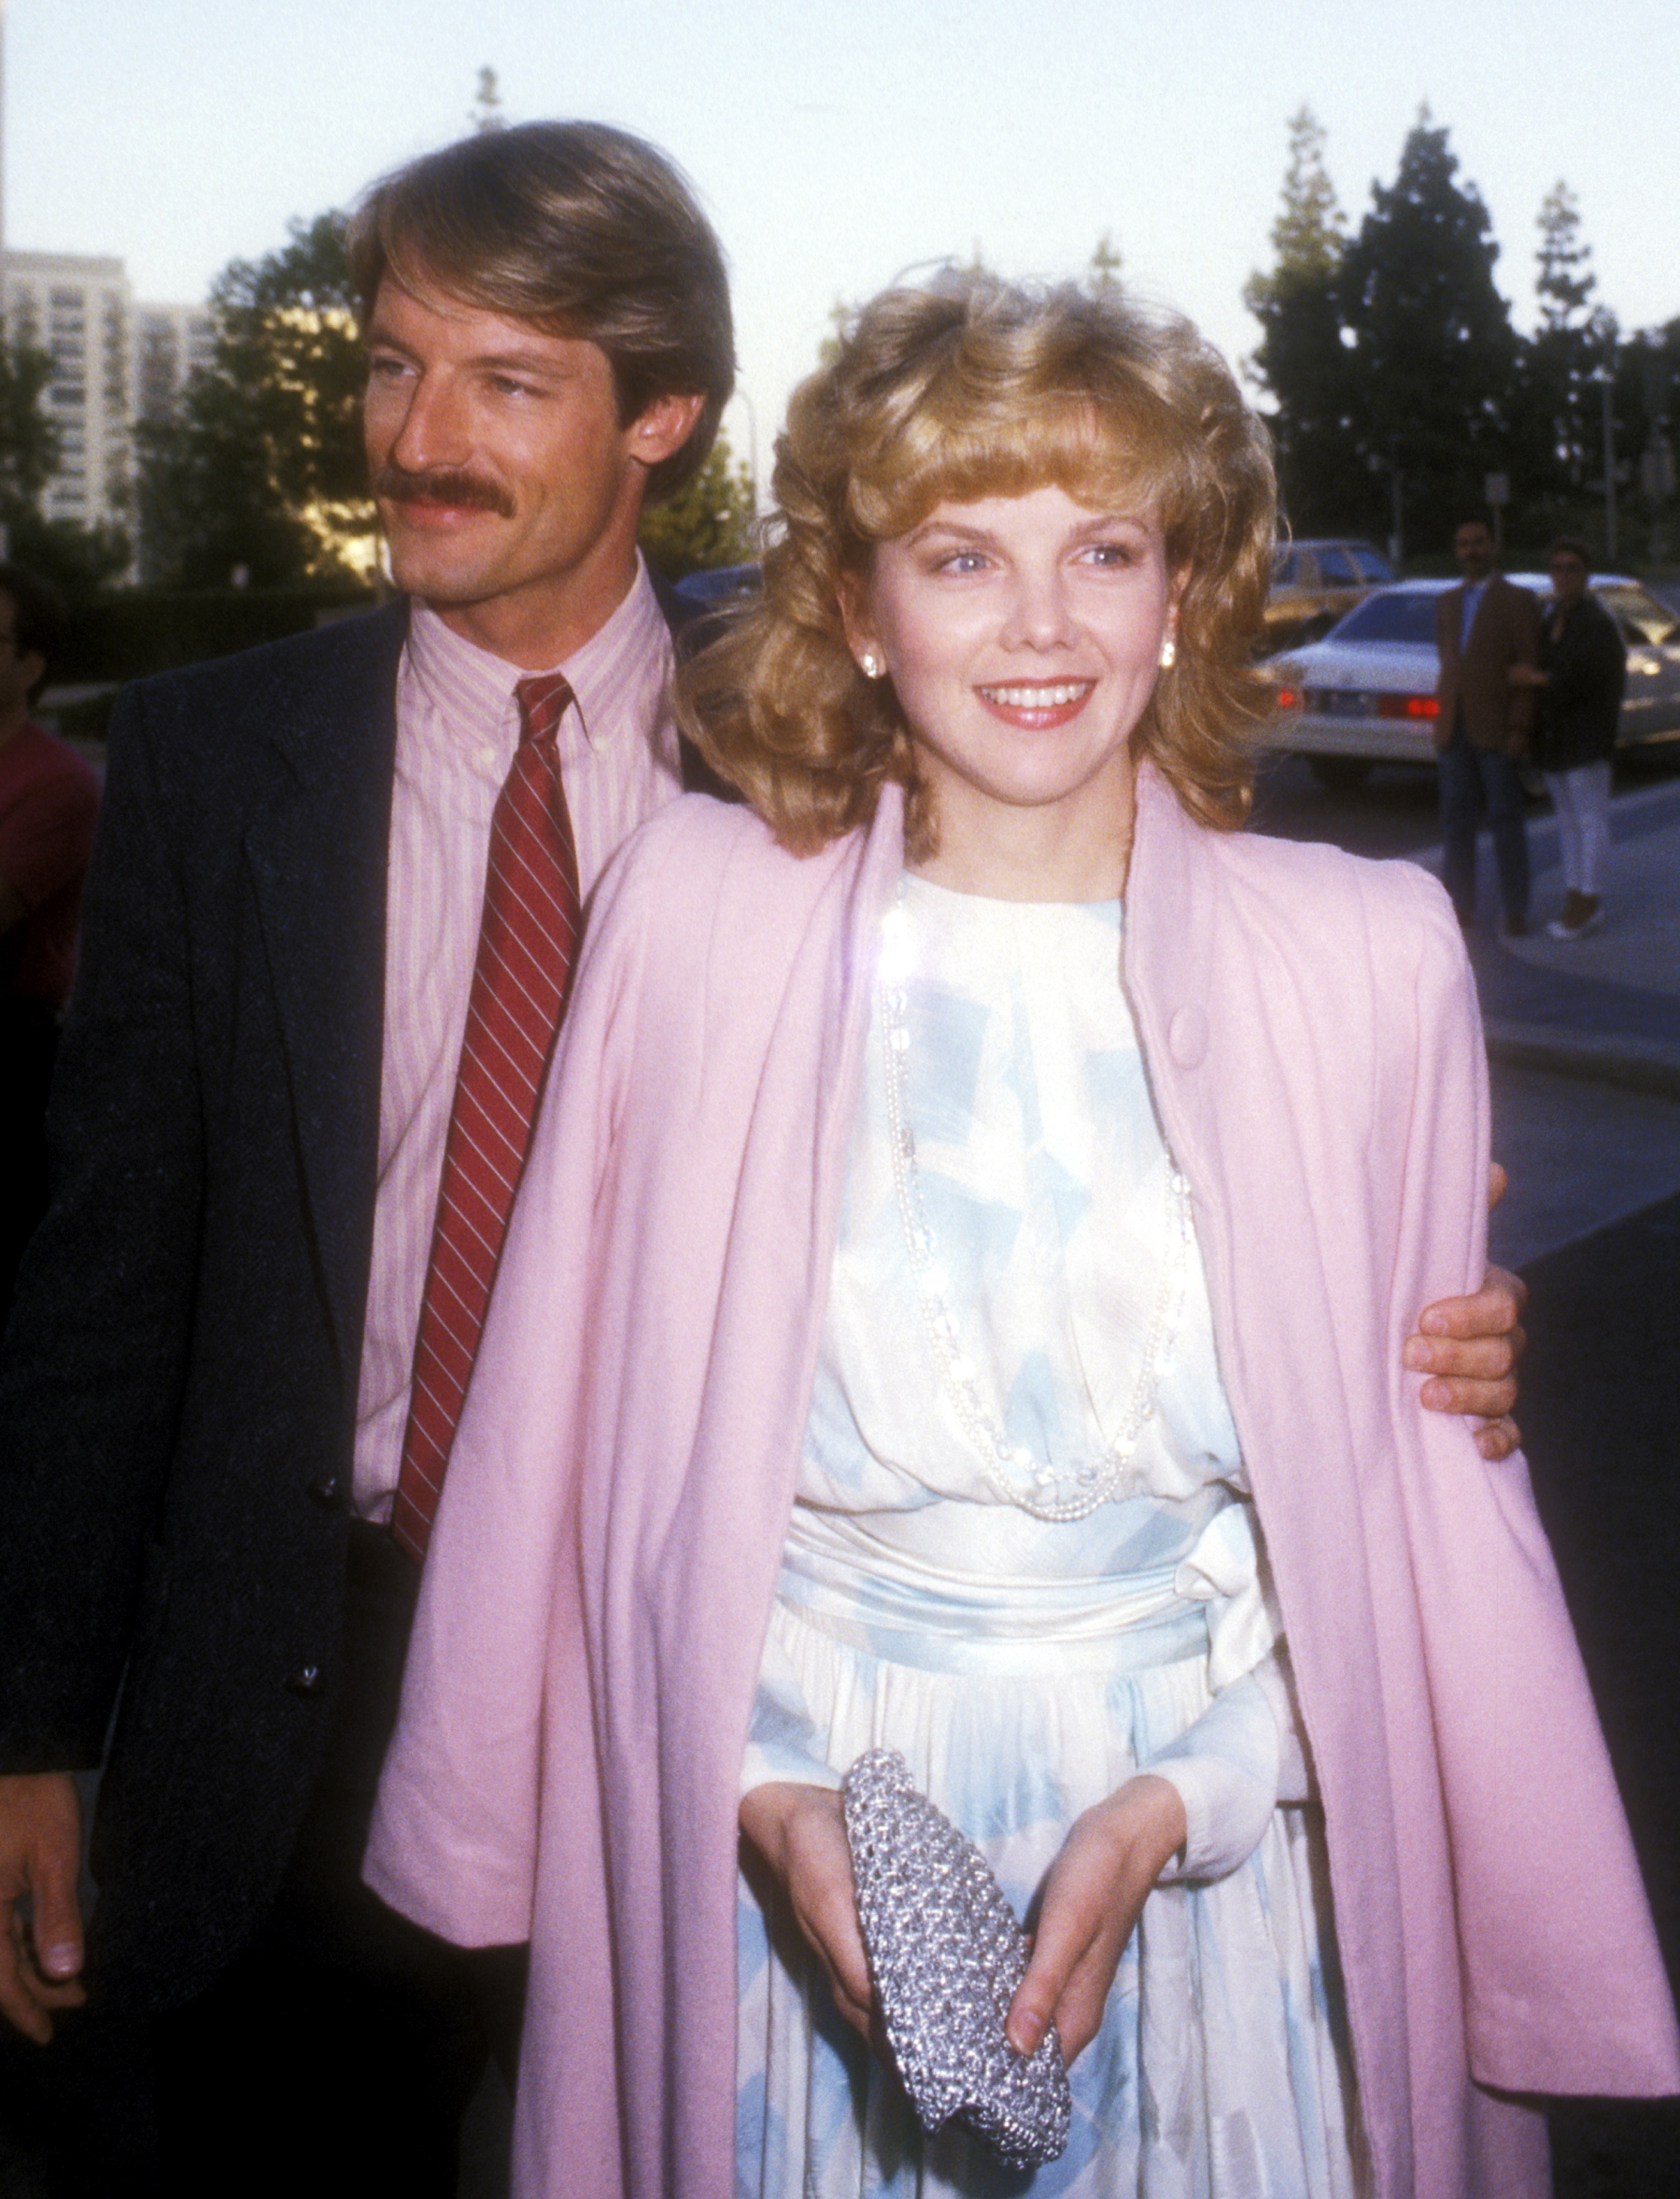 Perry King and Linda Purl at the NBC Affiliates Party in Los Angeles, 1985 | Source: Getty Images